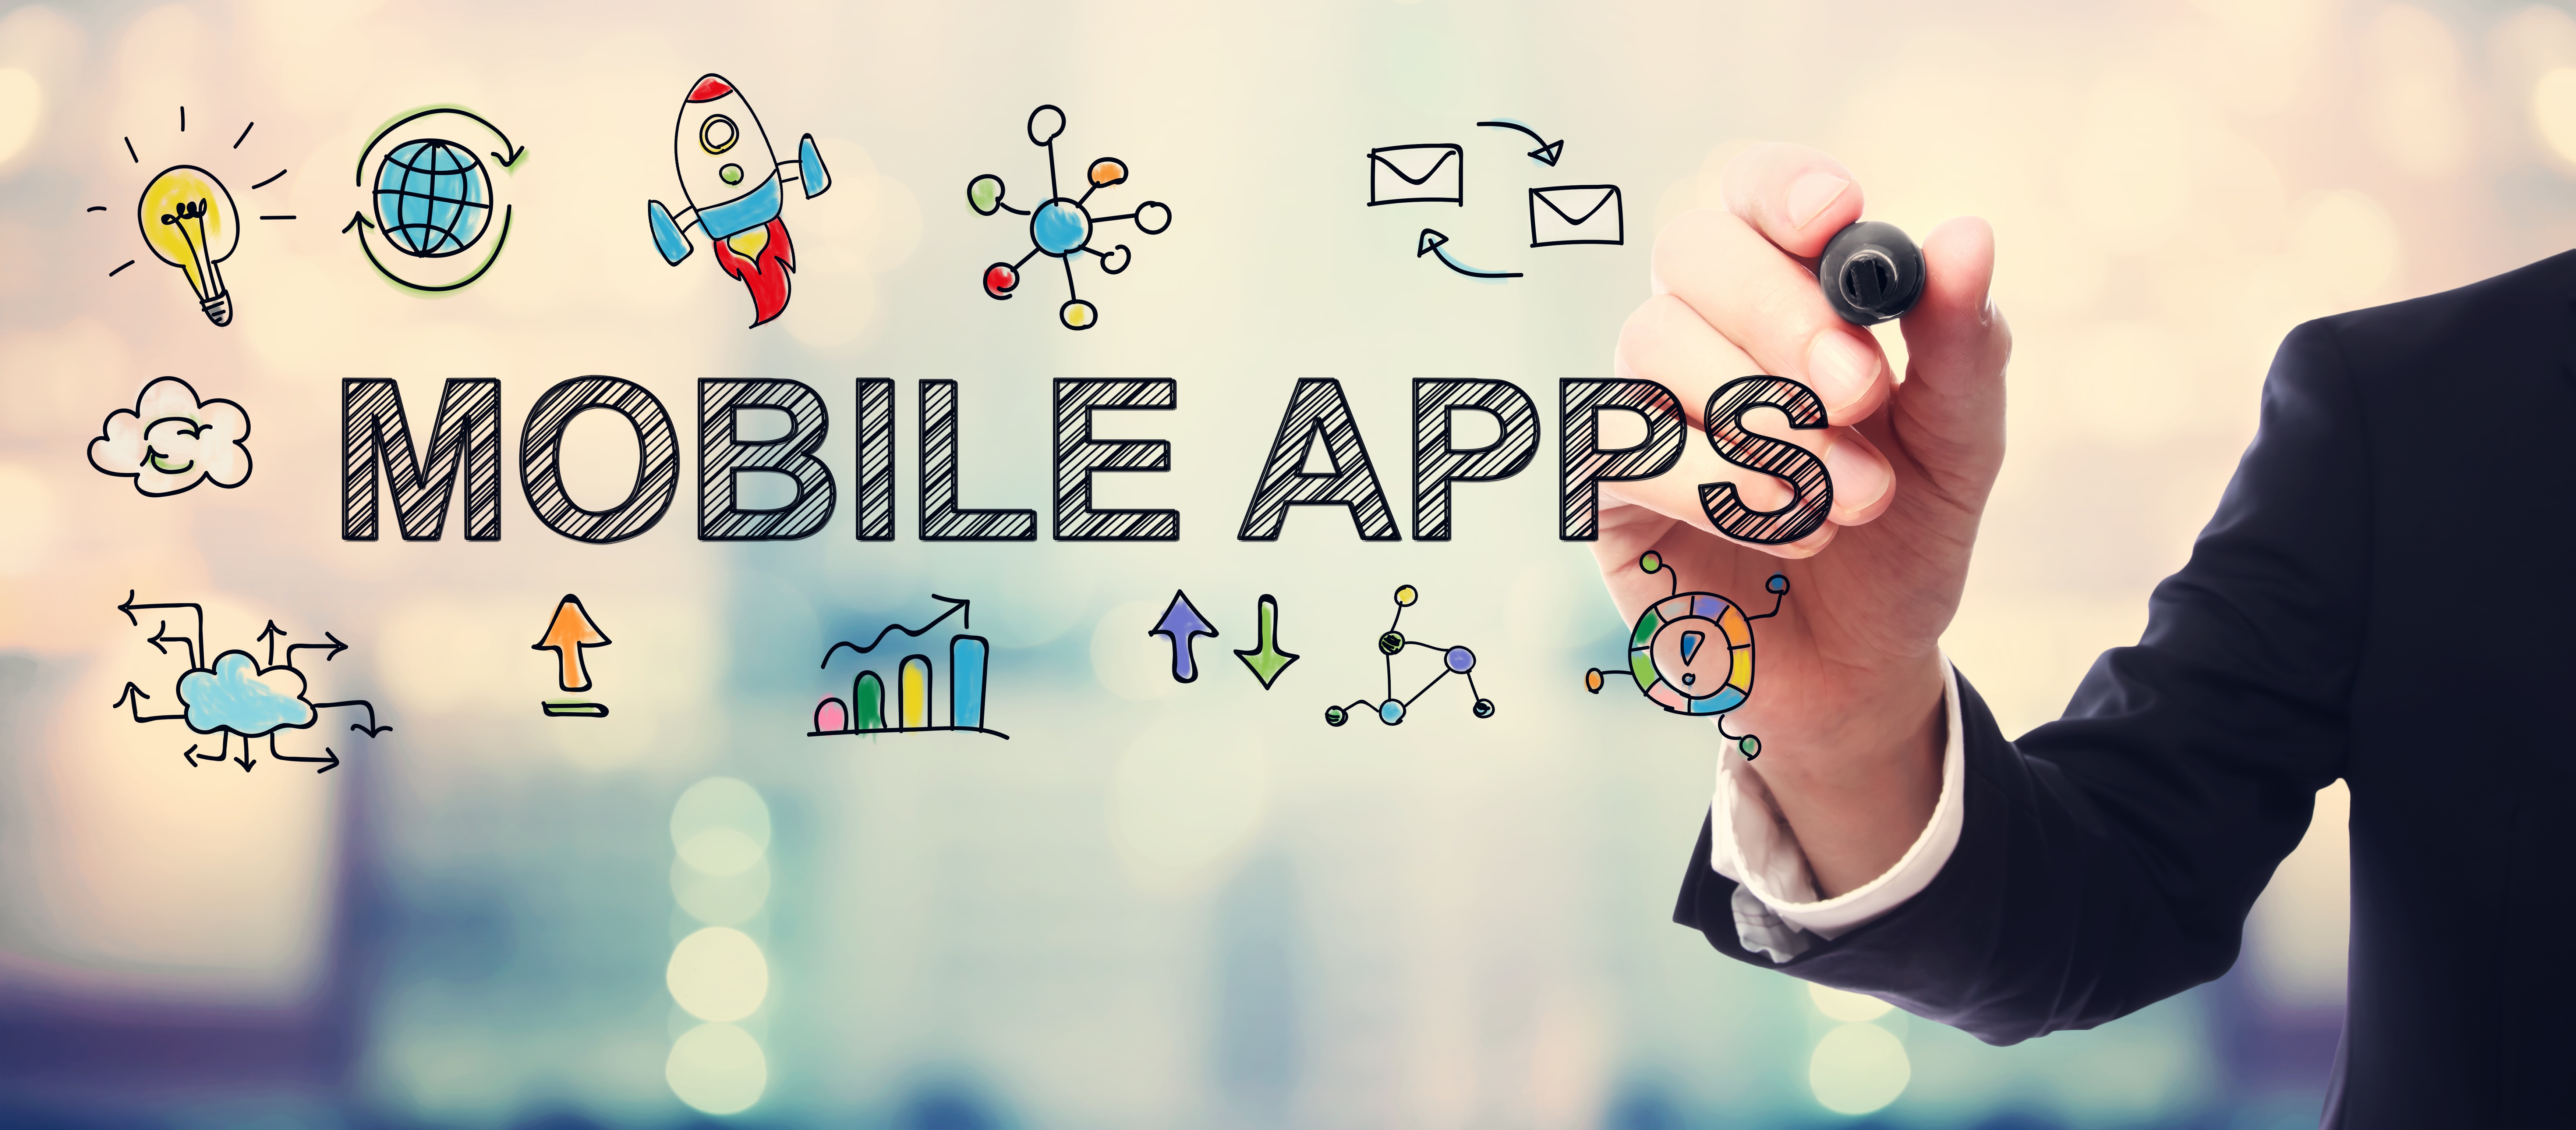 Mobiles apps to boost business